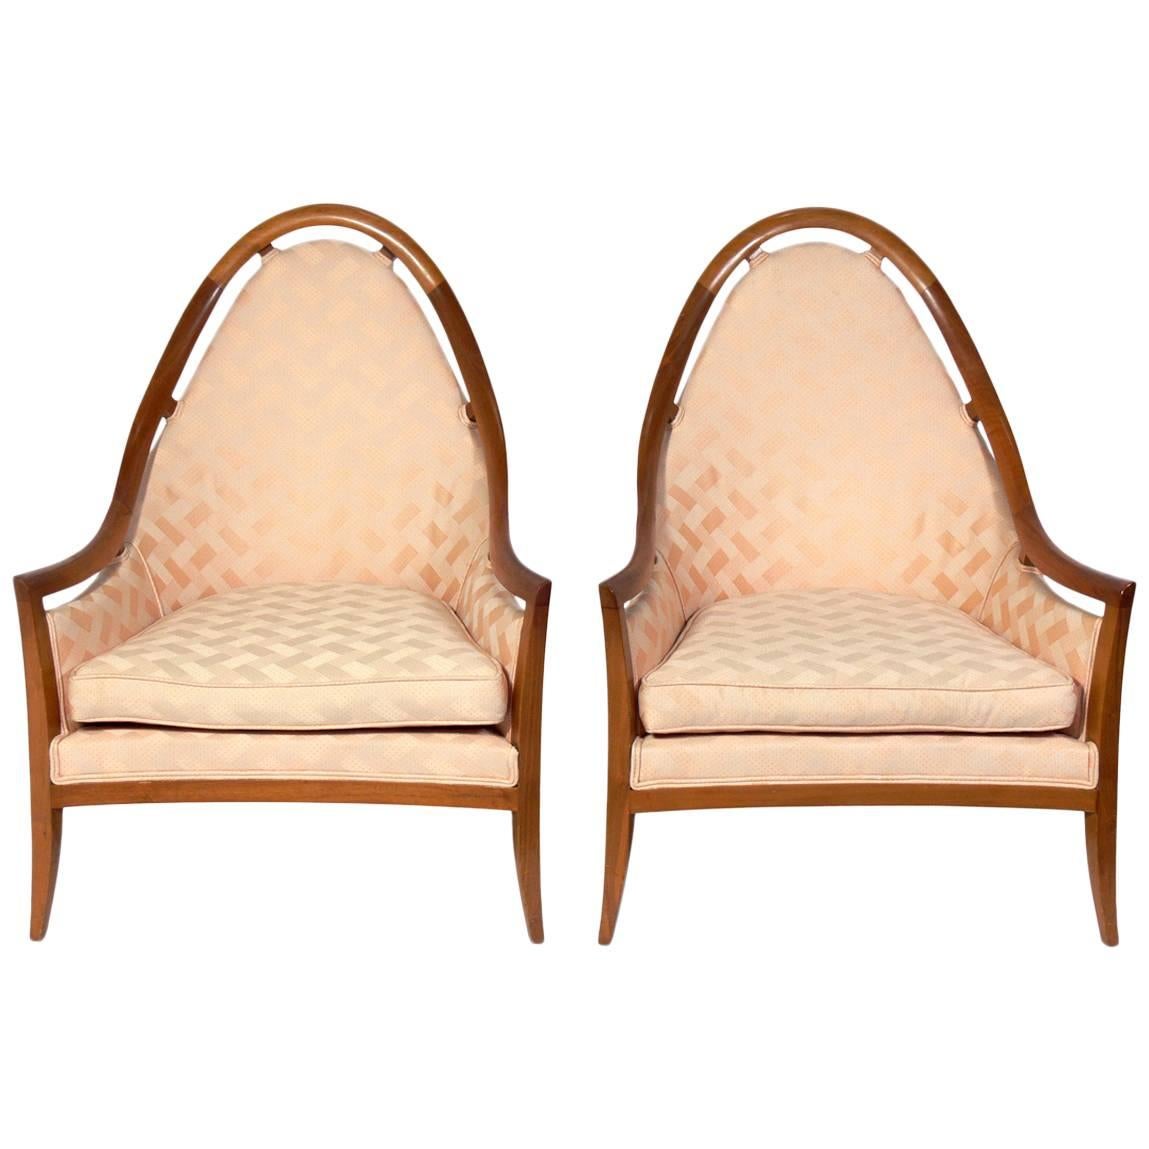 Pair of Sculptural Arch Back Chairs Designed in the Style of Harvey Probber